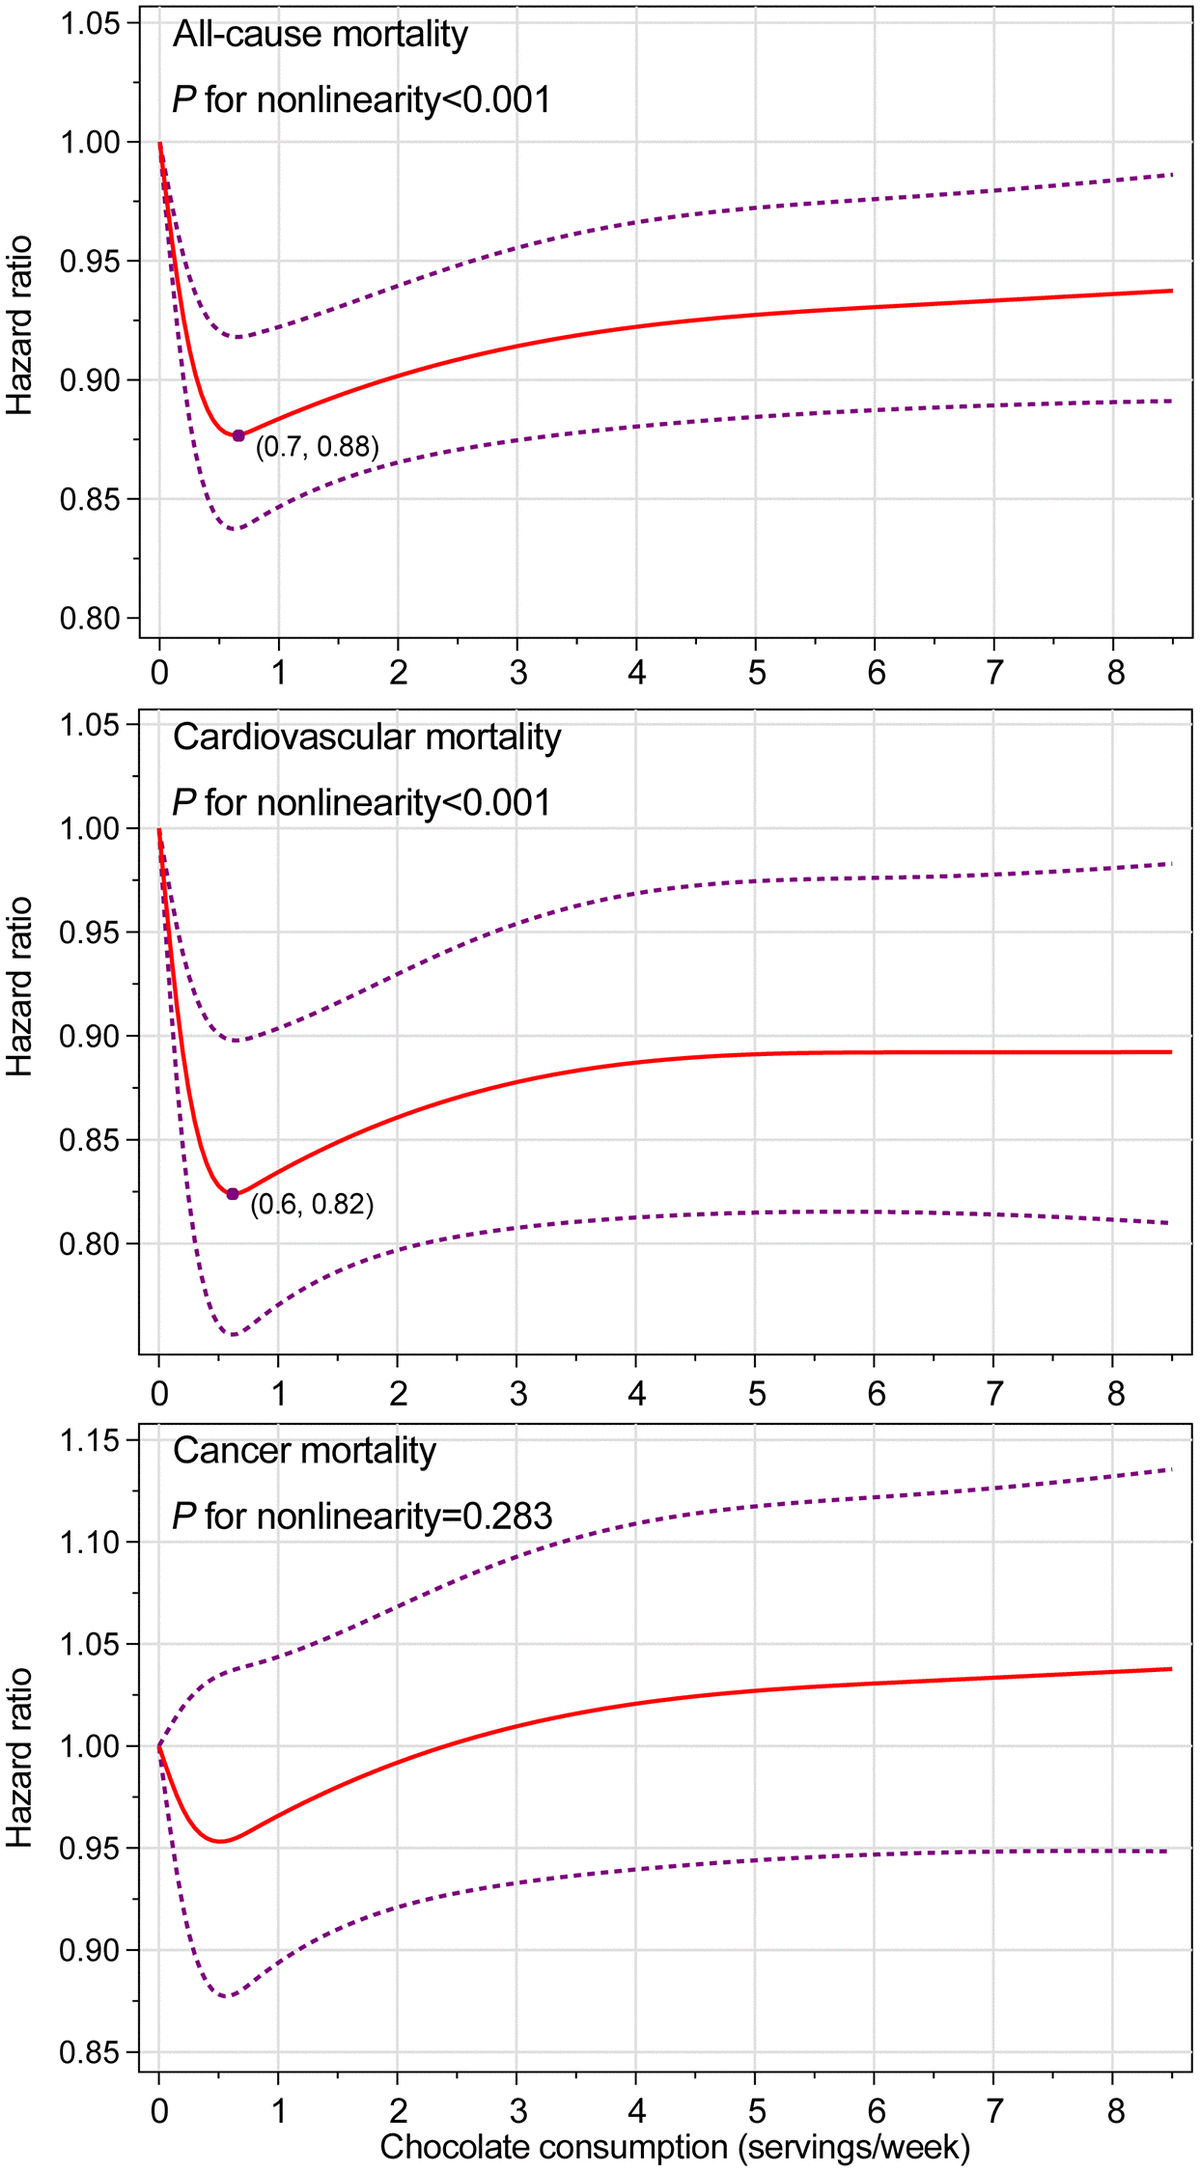 Nonlinear dose–response analyses on energy-adjusted chocolate consumption and mortality from all causes, cardiovascular disease, and cancer in the whole study population. The reference level was set at 0 servings/week. Hazard ratio was adjusted for age, sex, ethnicity, educational level, marital status, study center, history of hypertension, history of diabetes, aspirin use, hormone use status for women, smoking status, alcohol consumption, body mass index, physical activity, energy intake from diet, and consumption of red meat, processed meat, fruit, vegetable, whole grain, dairy, coffee, and tea. For all-cause and cancer mortality, the hazard ratio was further adjusted for family history of cancer. The red solid line represents the fitted nonlinear trend, and the purple short-dash line represents corresponding 95% confidence interval.